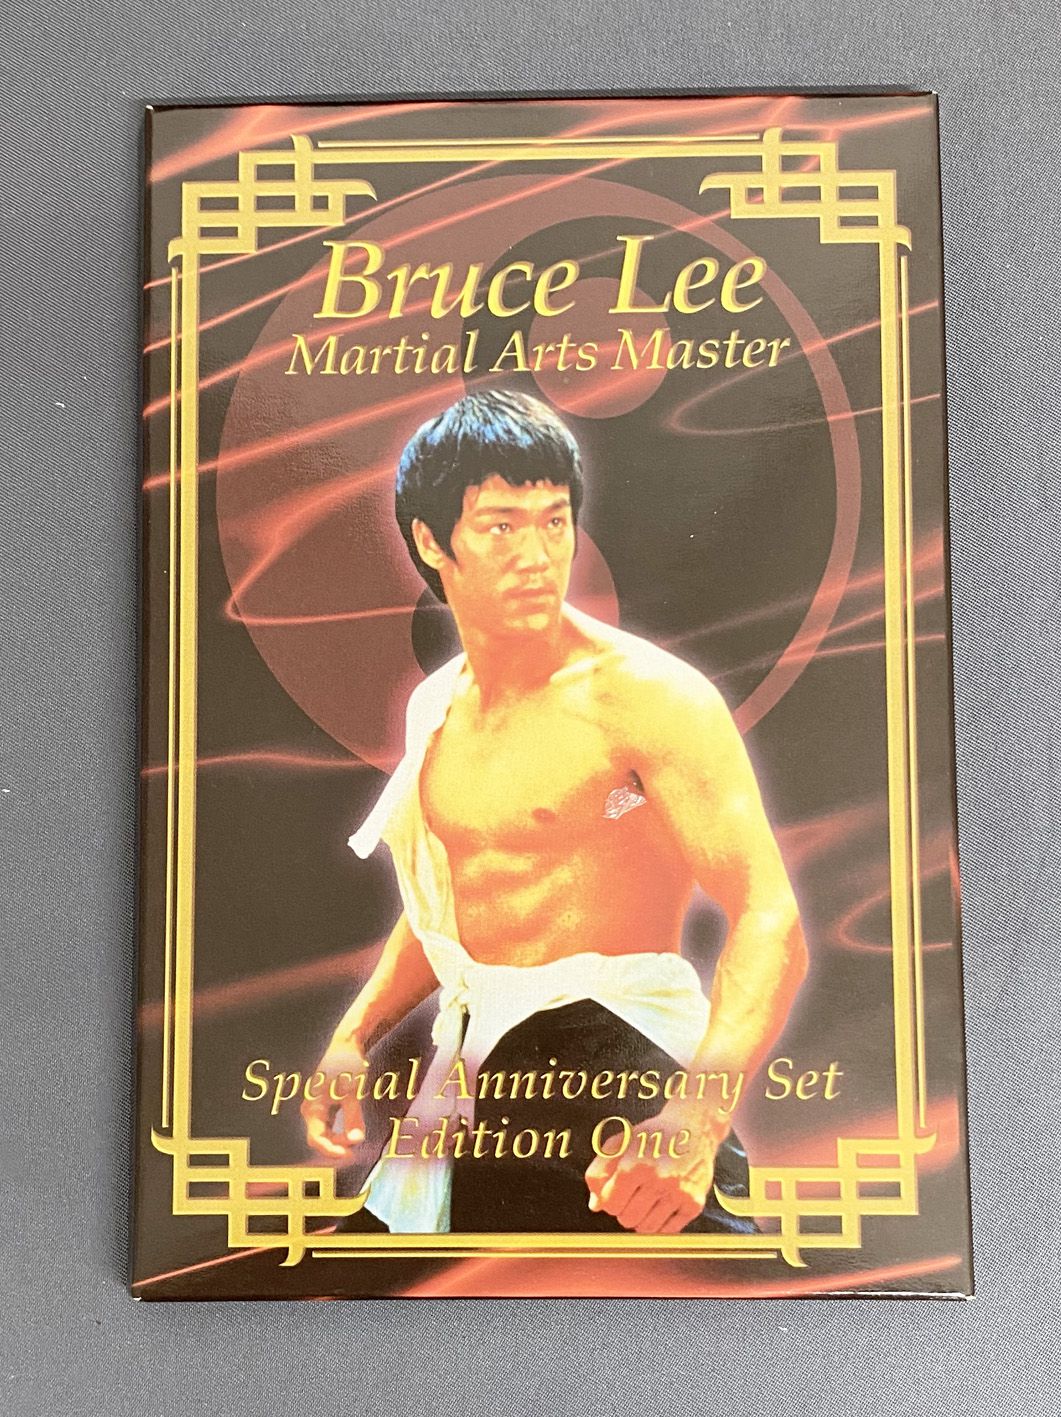 Bruce Lee (Martial Arts Master) - London Postcard Co. - Special Anniversary  Set (Edition One)